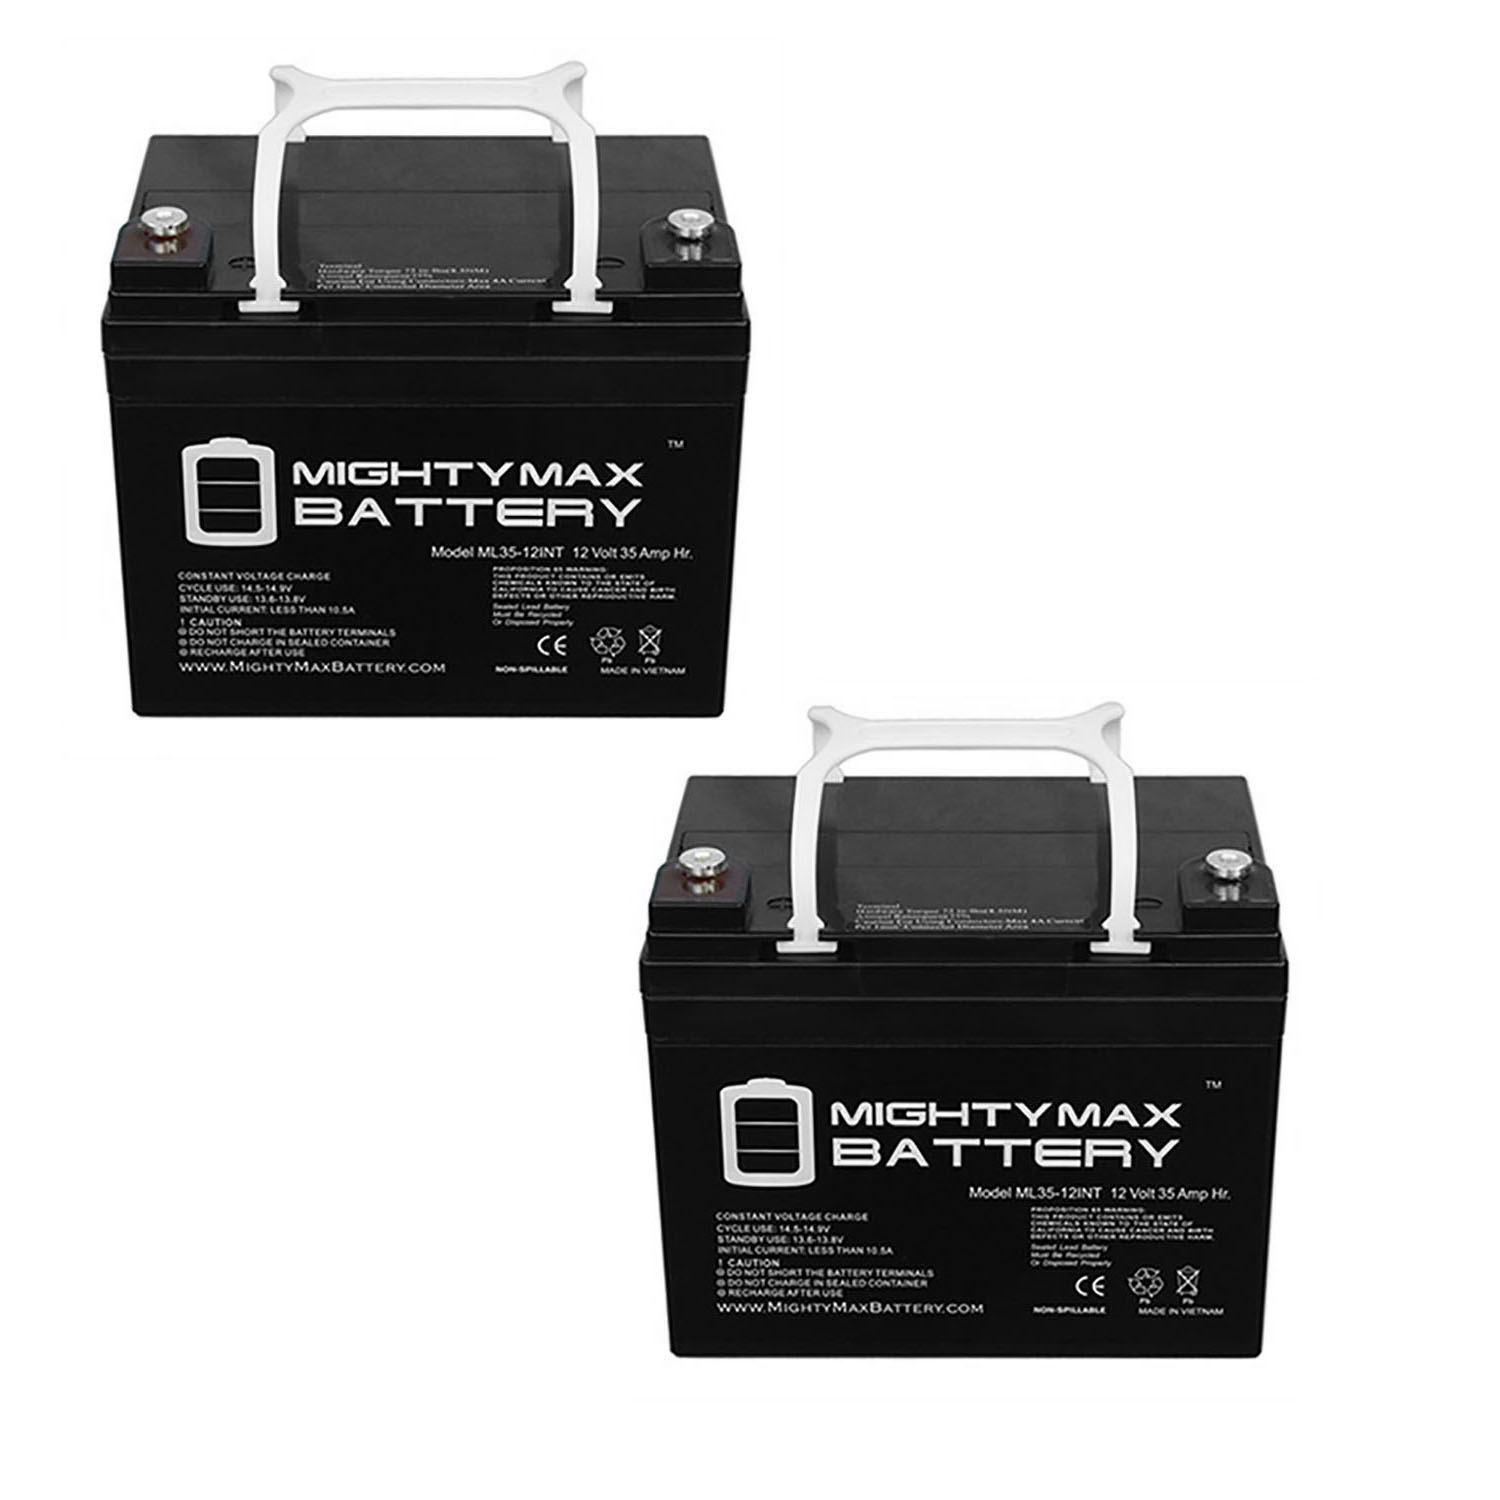 12V 35AH INT Replacement Battery for Pride BATLIQ1017 - 2 Pack